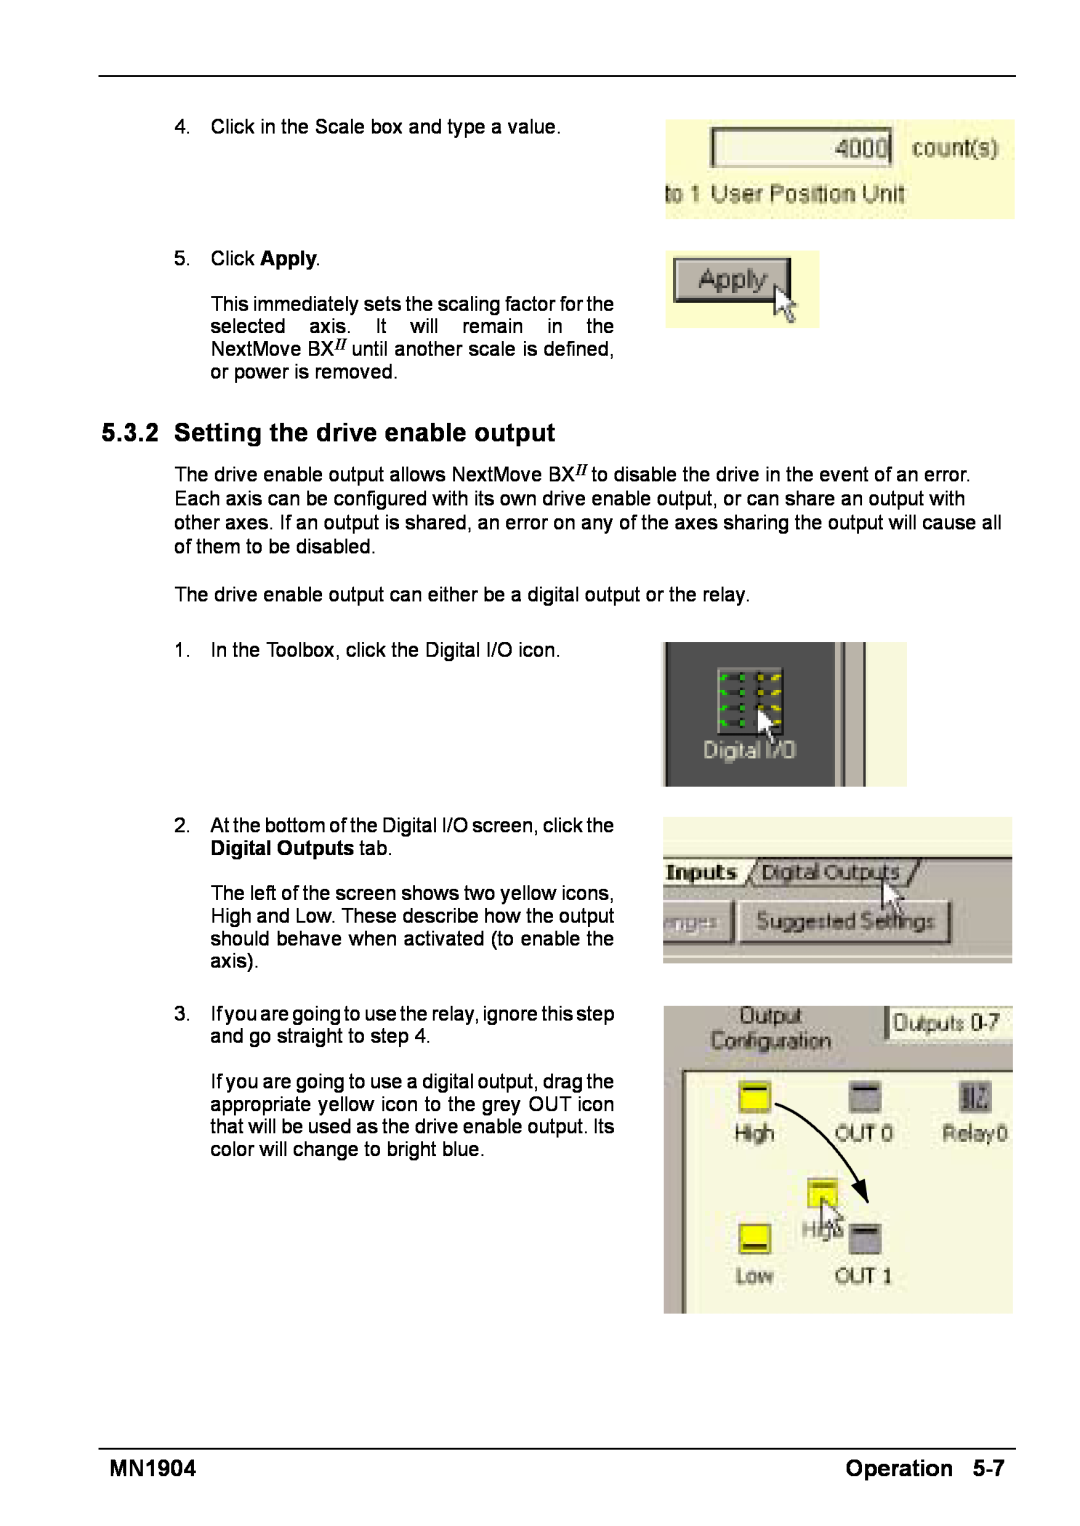 Baldor BXII installation manual 5.3.2Setting the drive enable output 